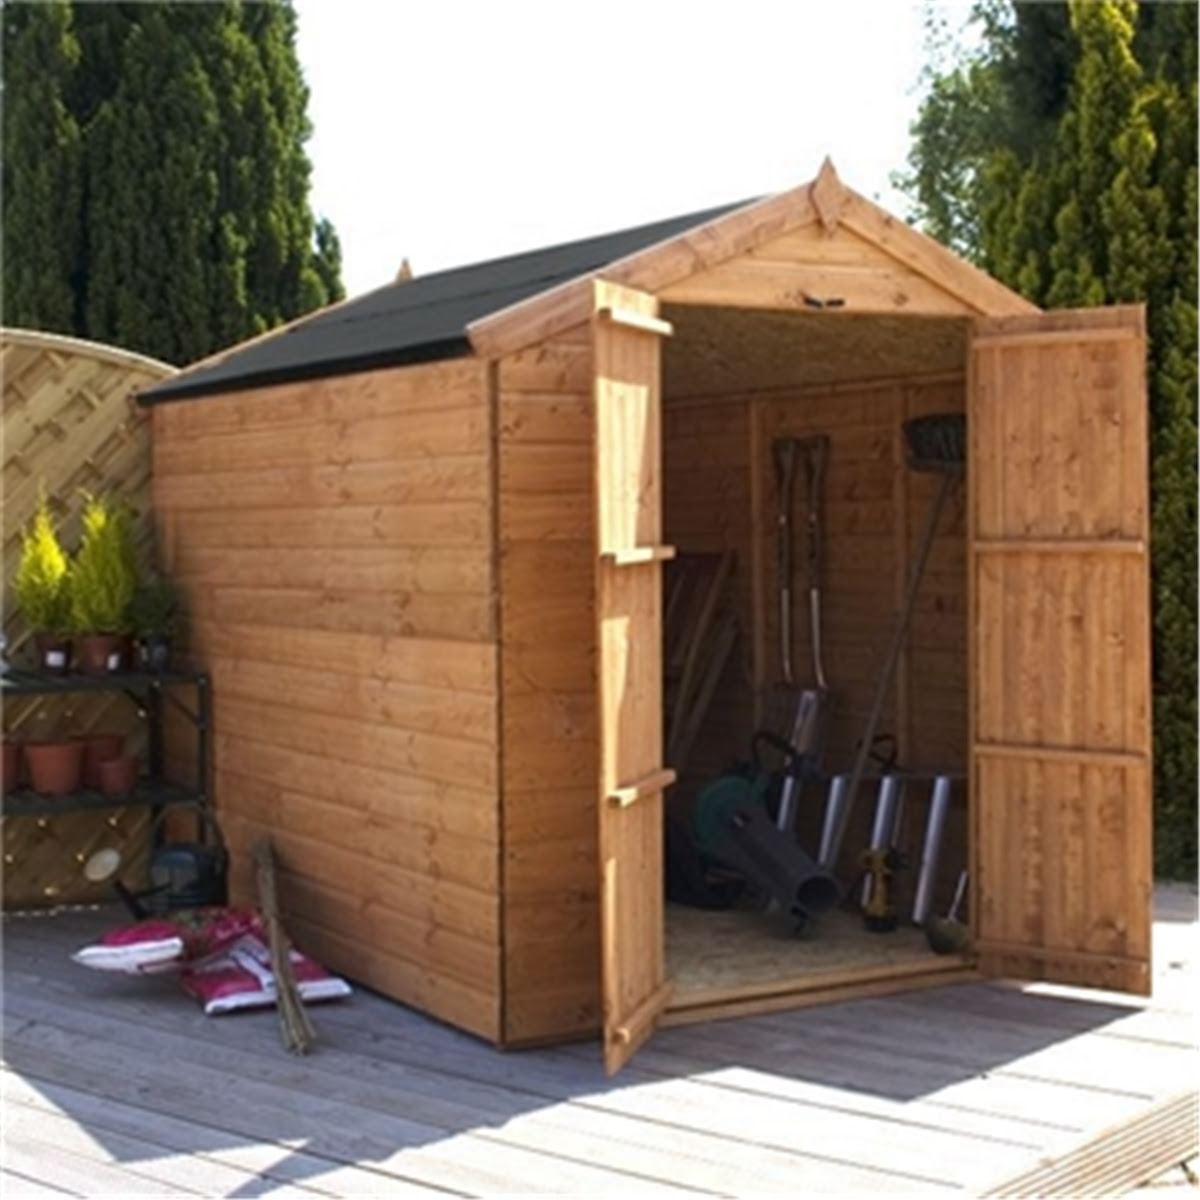 8 x 6 Windowless Shed